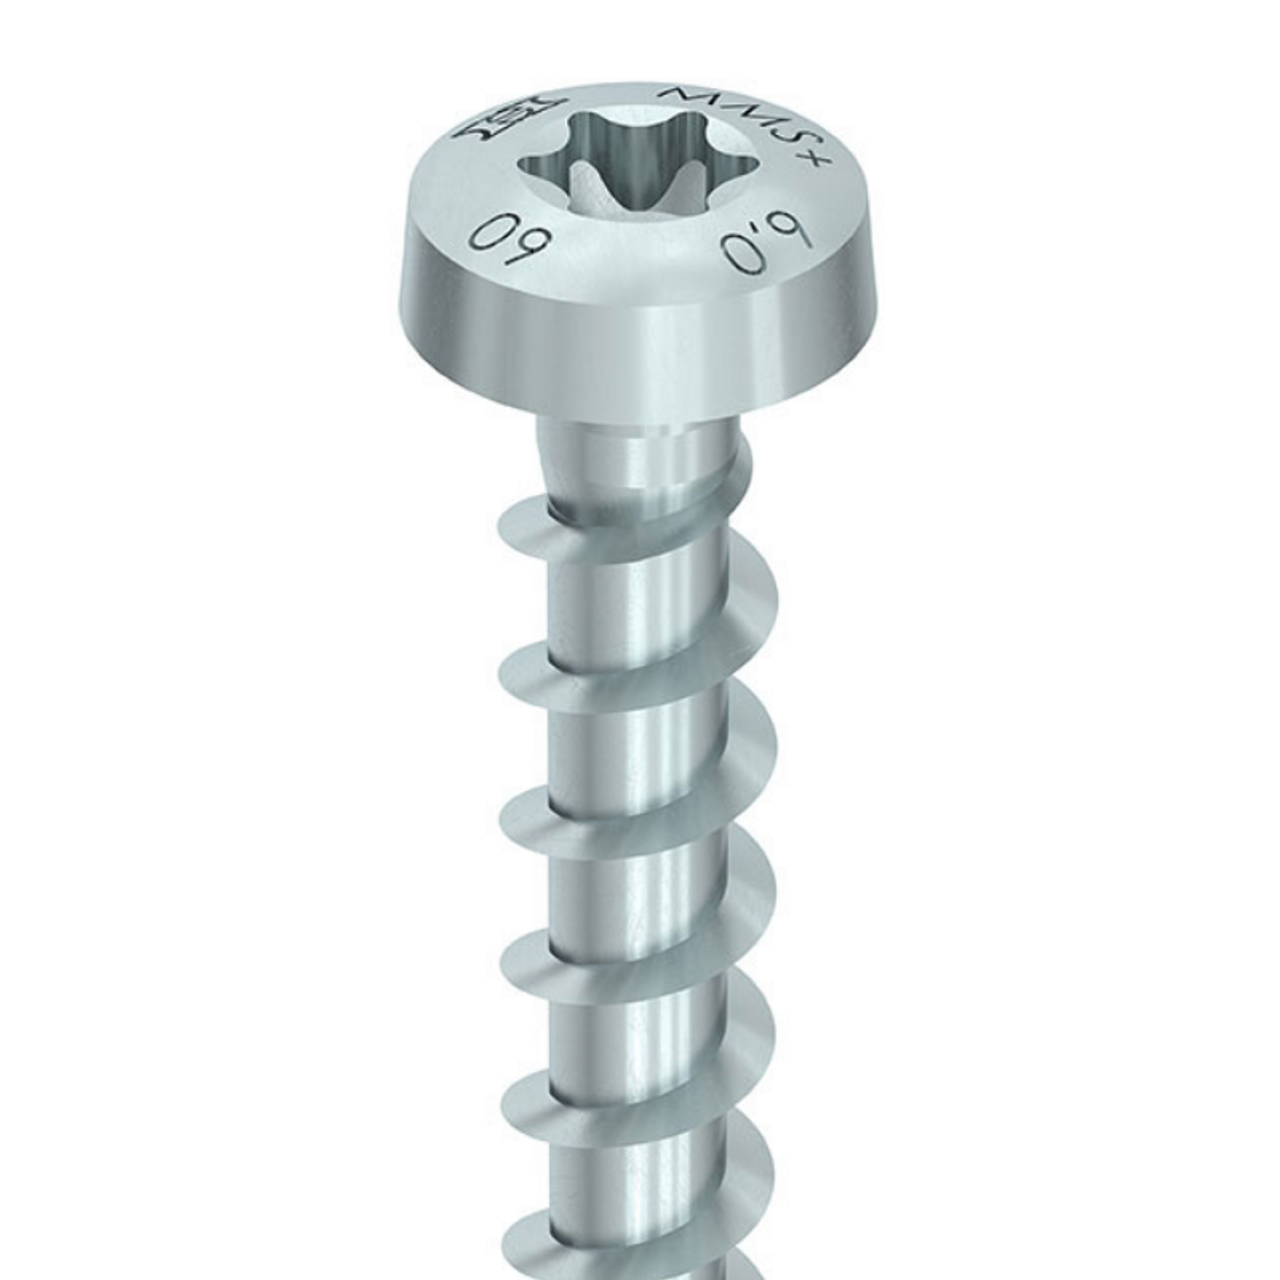 Craftsman Hardware supplies HECO 10mm Pan Head Screw Anchor with Silver Zinc for the Construction Industry and Installers in Glen Waverley, Bayswater and Mitcham